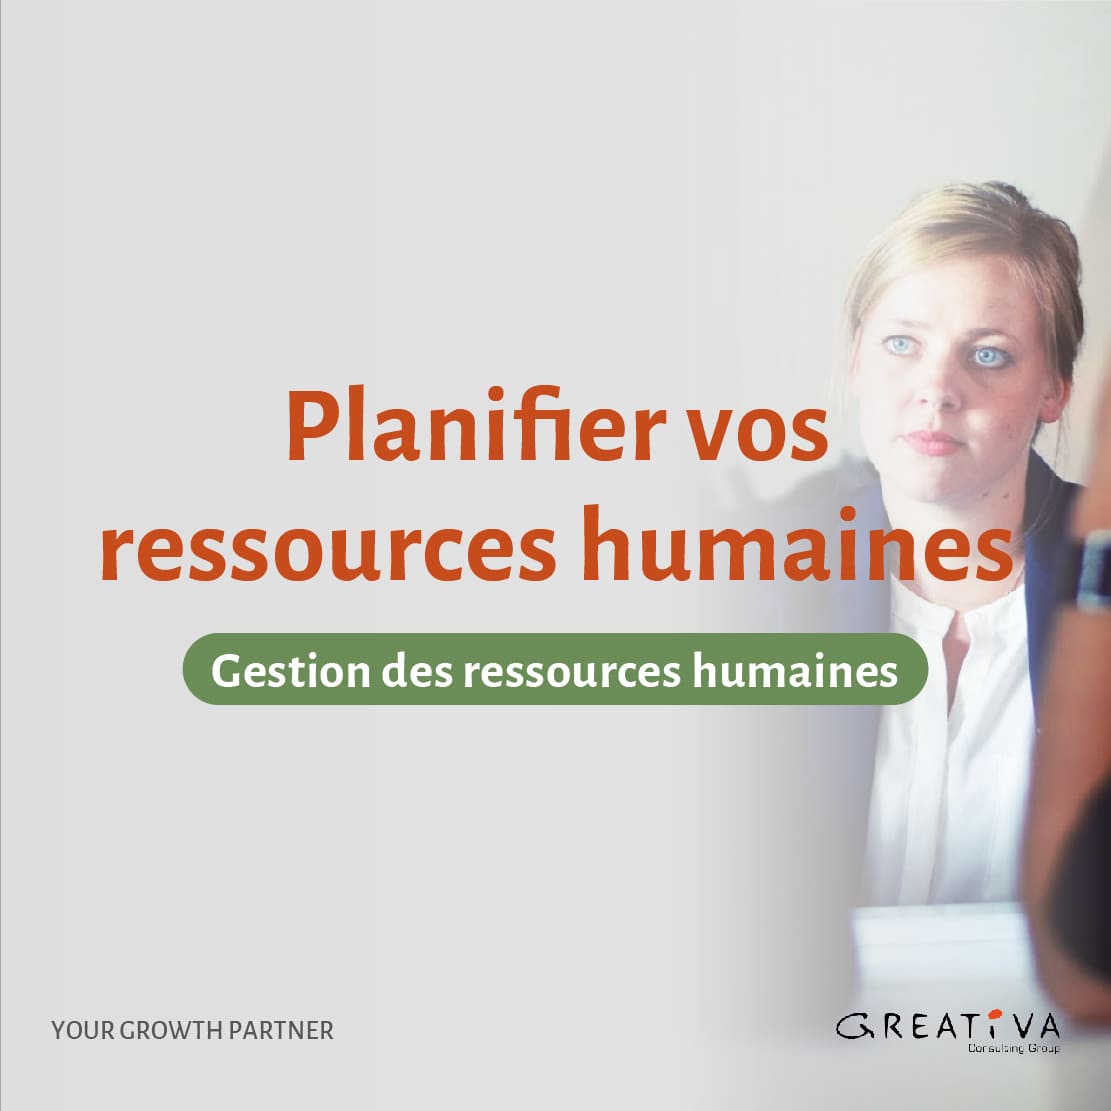 Planifier vos ressources humaines